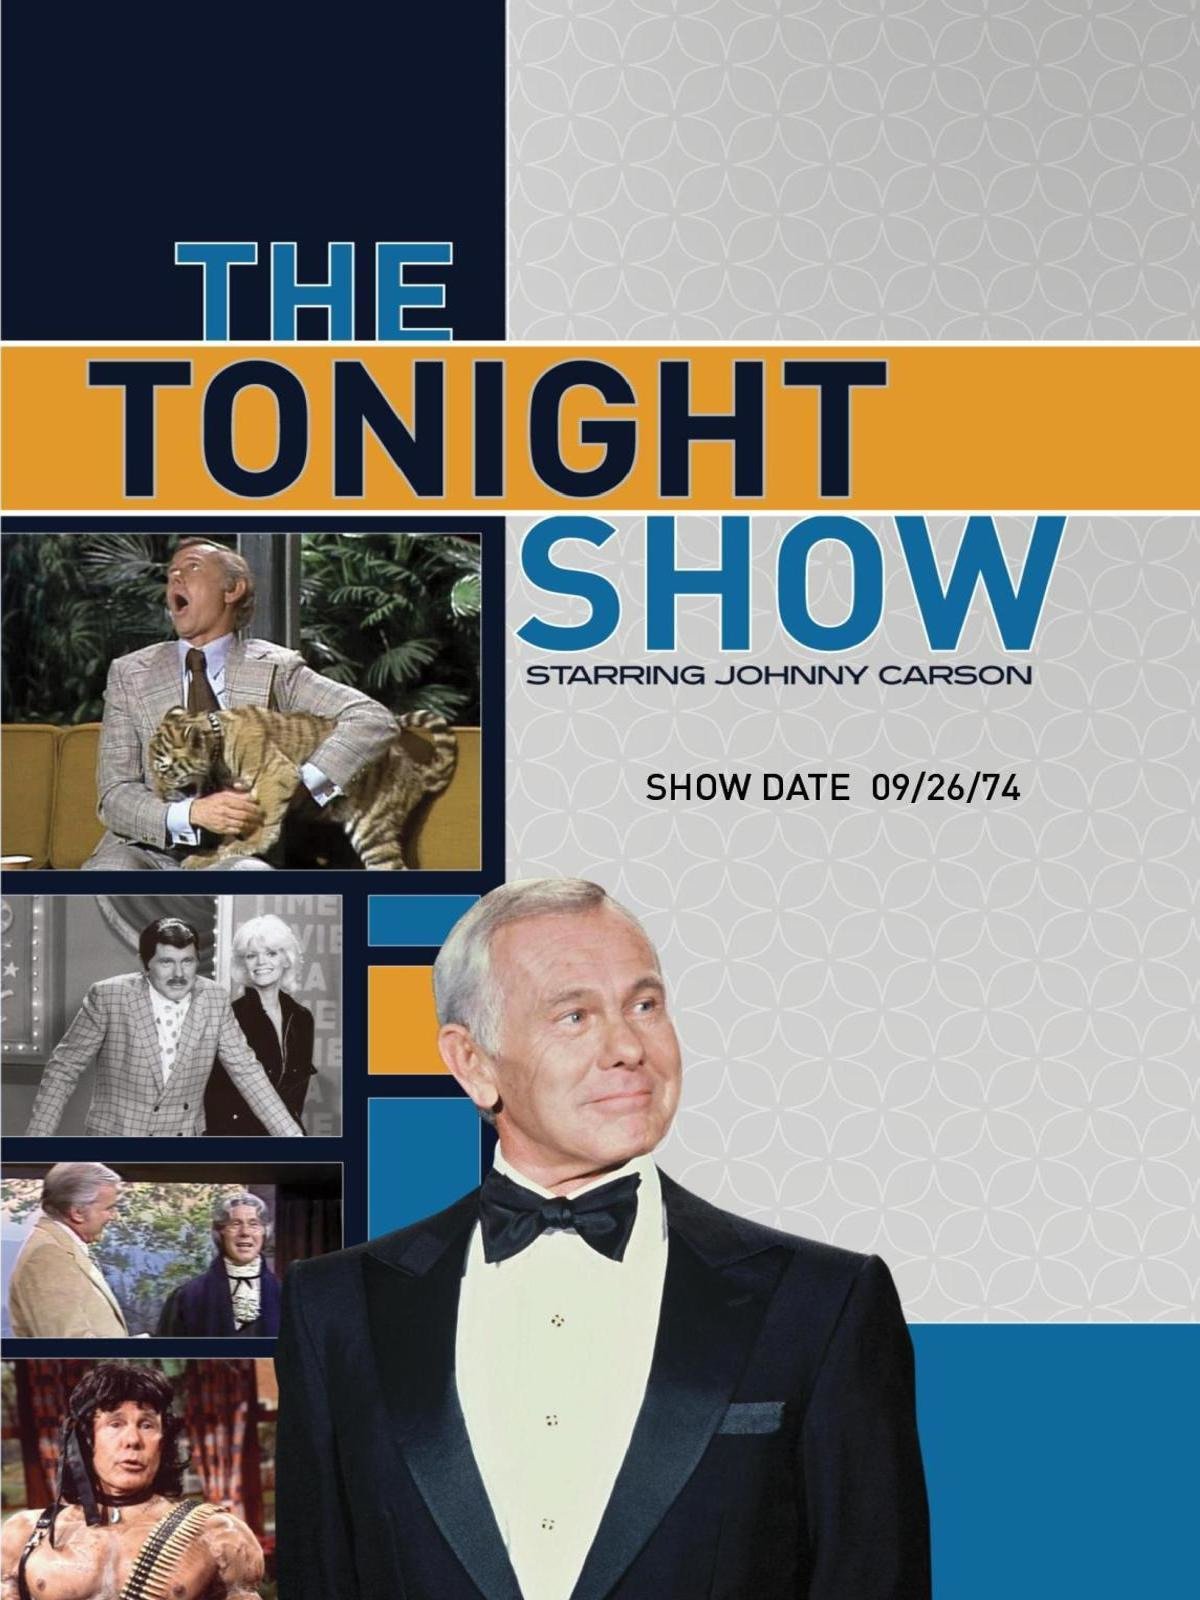 The Tonight Show starring Johnny Carson - Show Date: 09/26/74